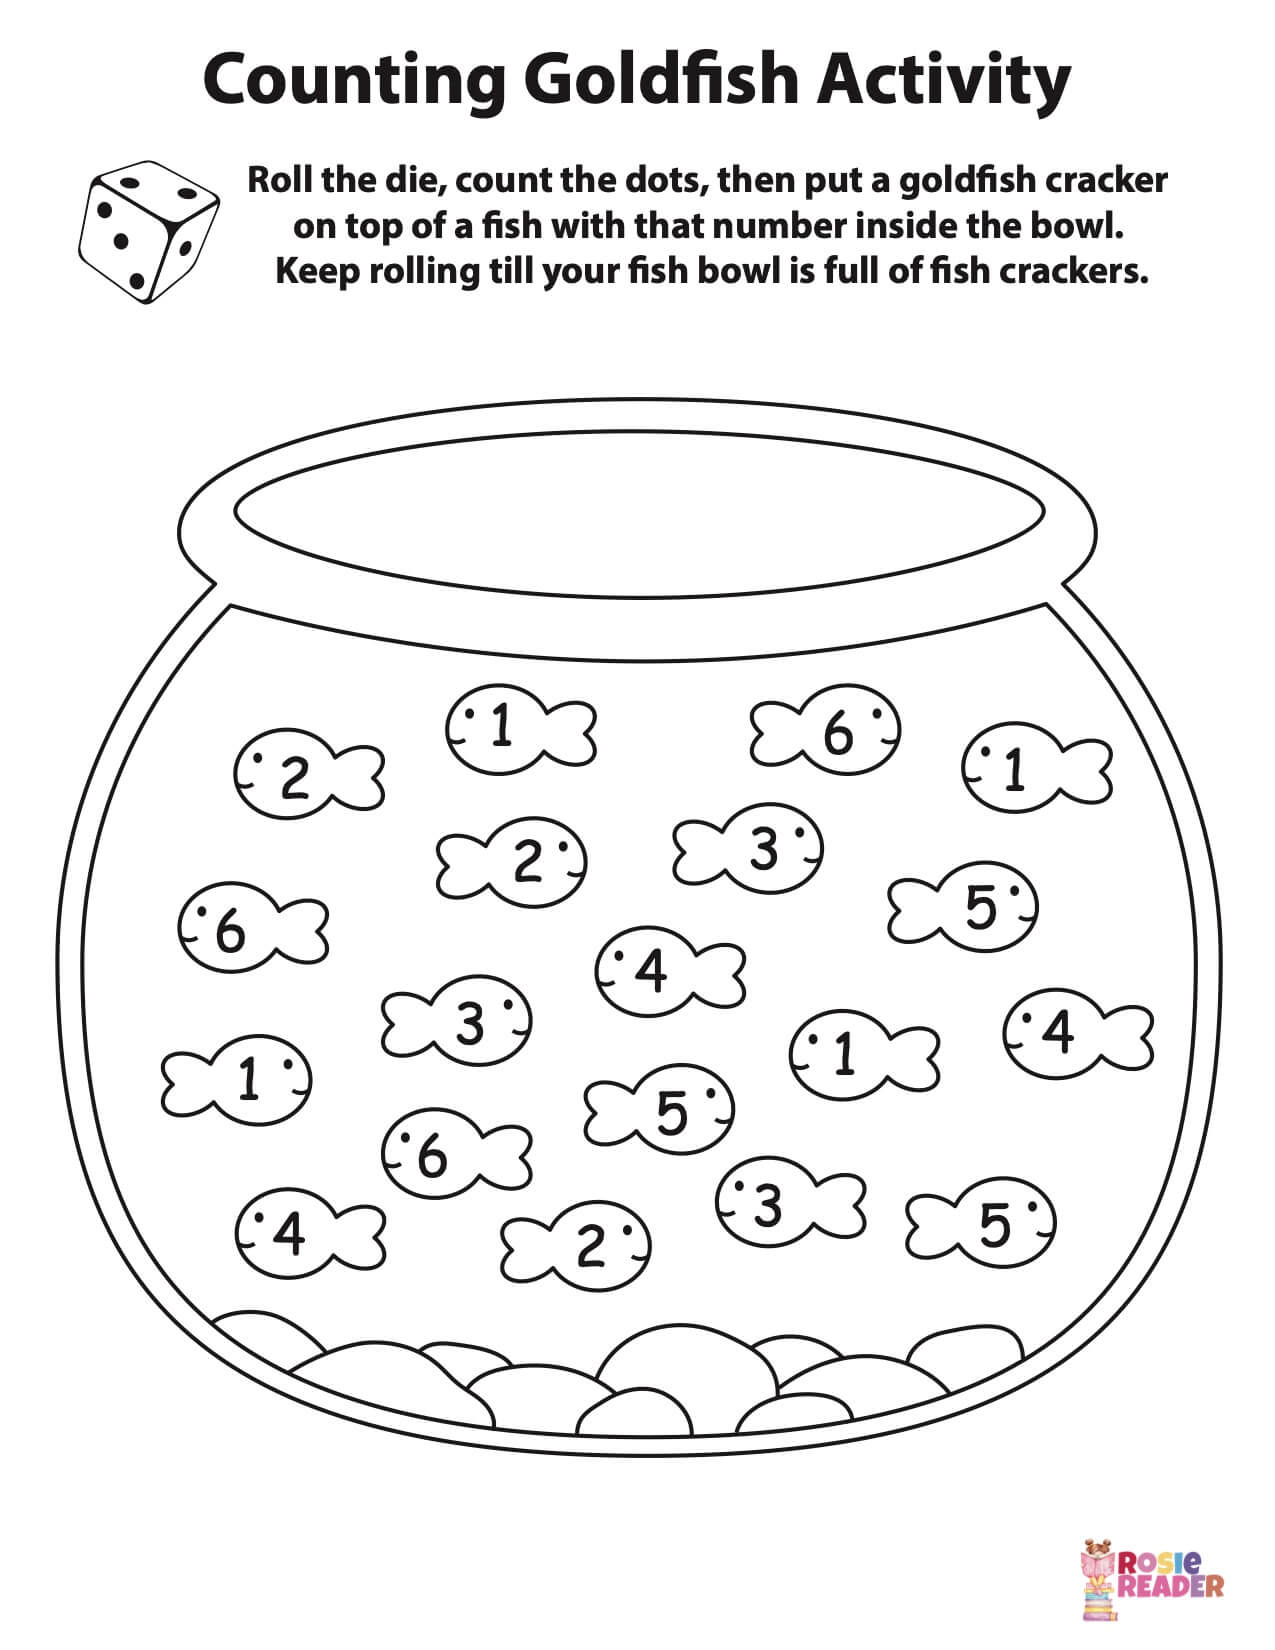 counting-goldfish-activity-printable-die-reading-adventures-for